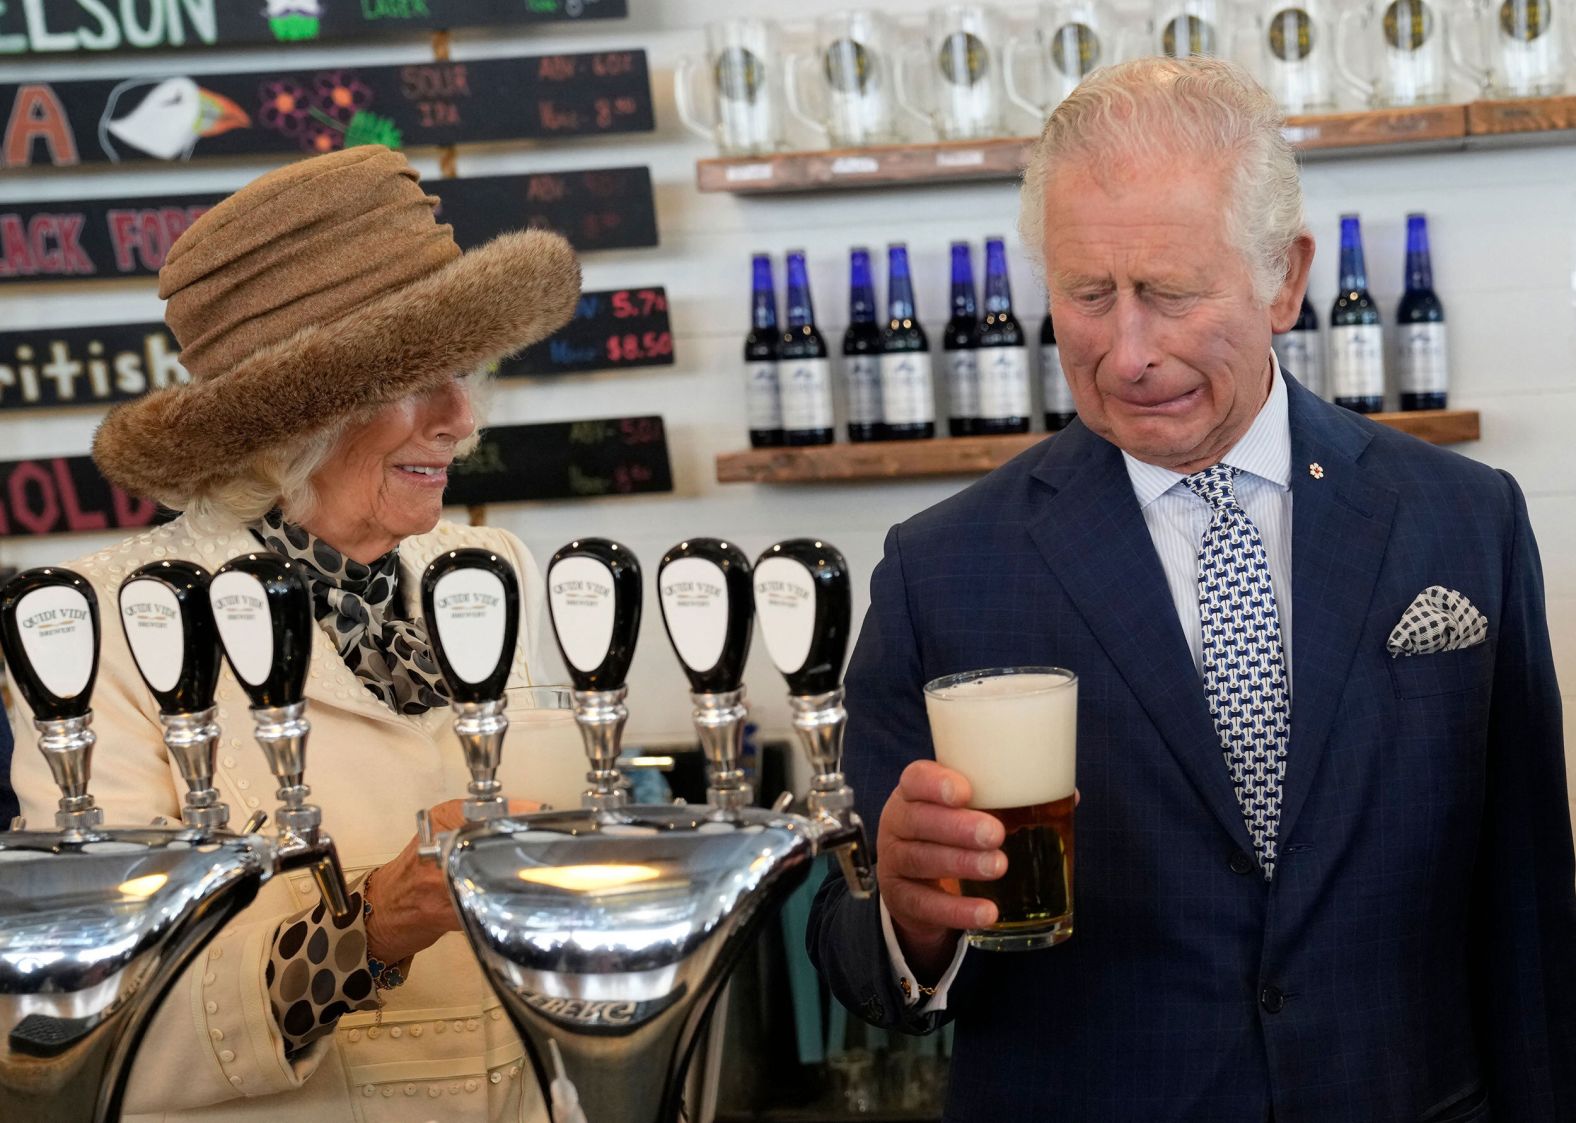 Camilla looks on as Charles reacts to a bad pour of beer he made at a brewery in St. John's, Newfoundland and Labrador, in May 2022. They were on a three-day Canadian tour.